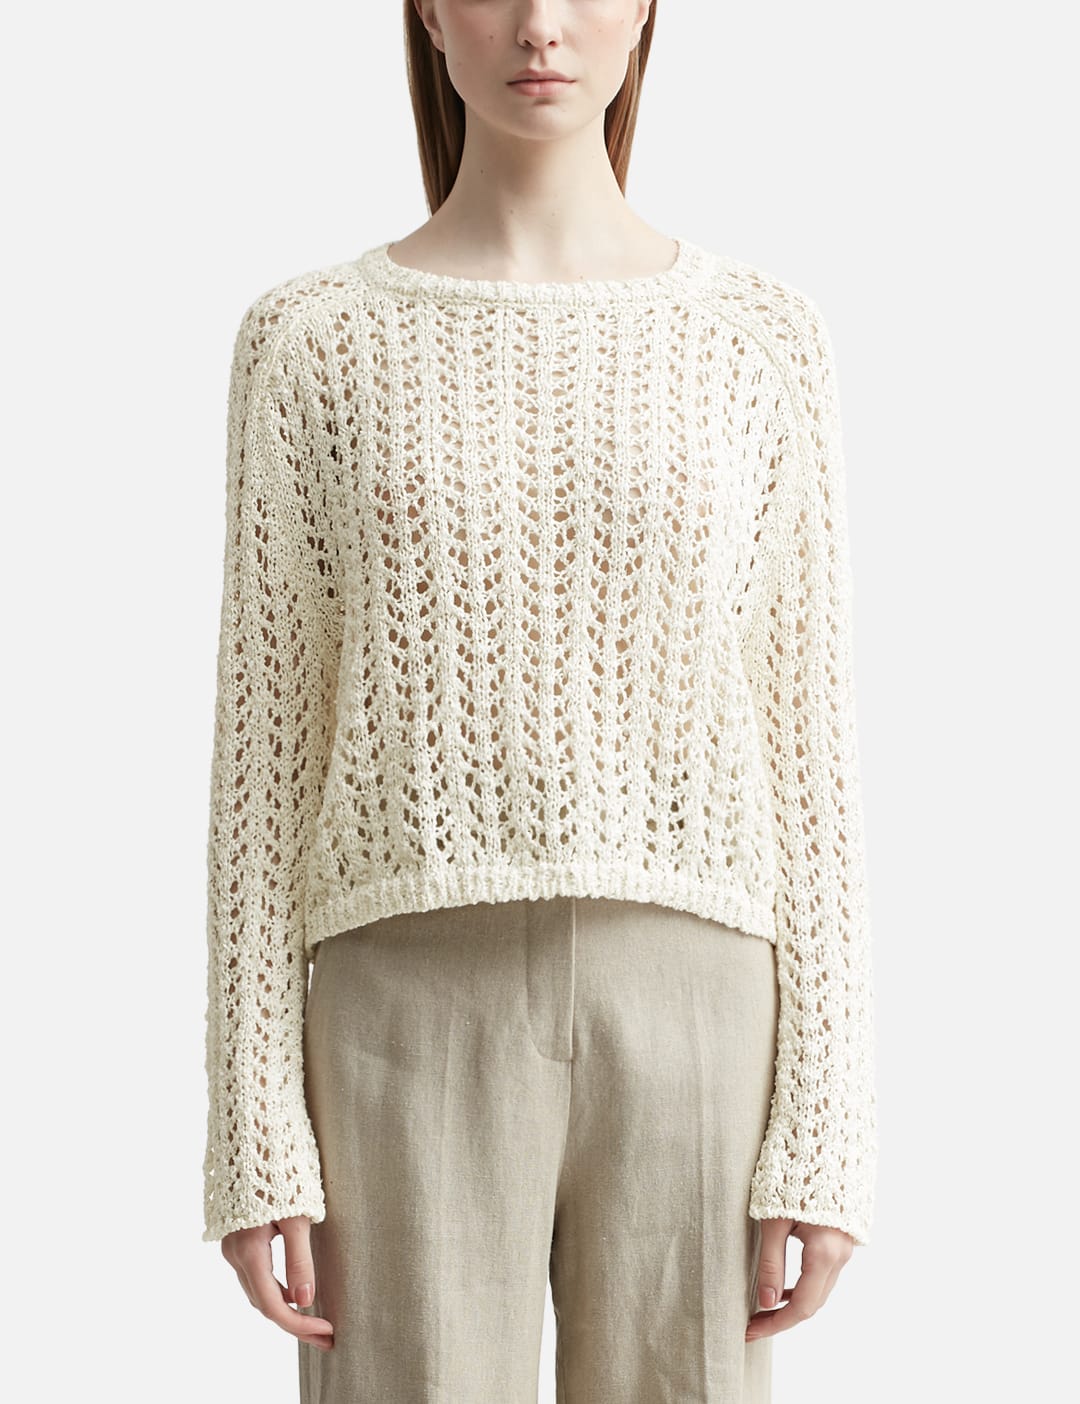 Rohe Resort Style Knitted Top